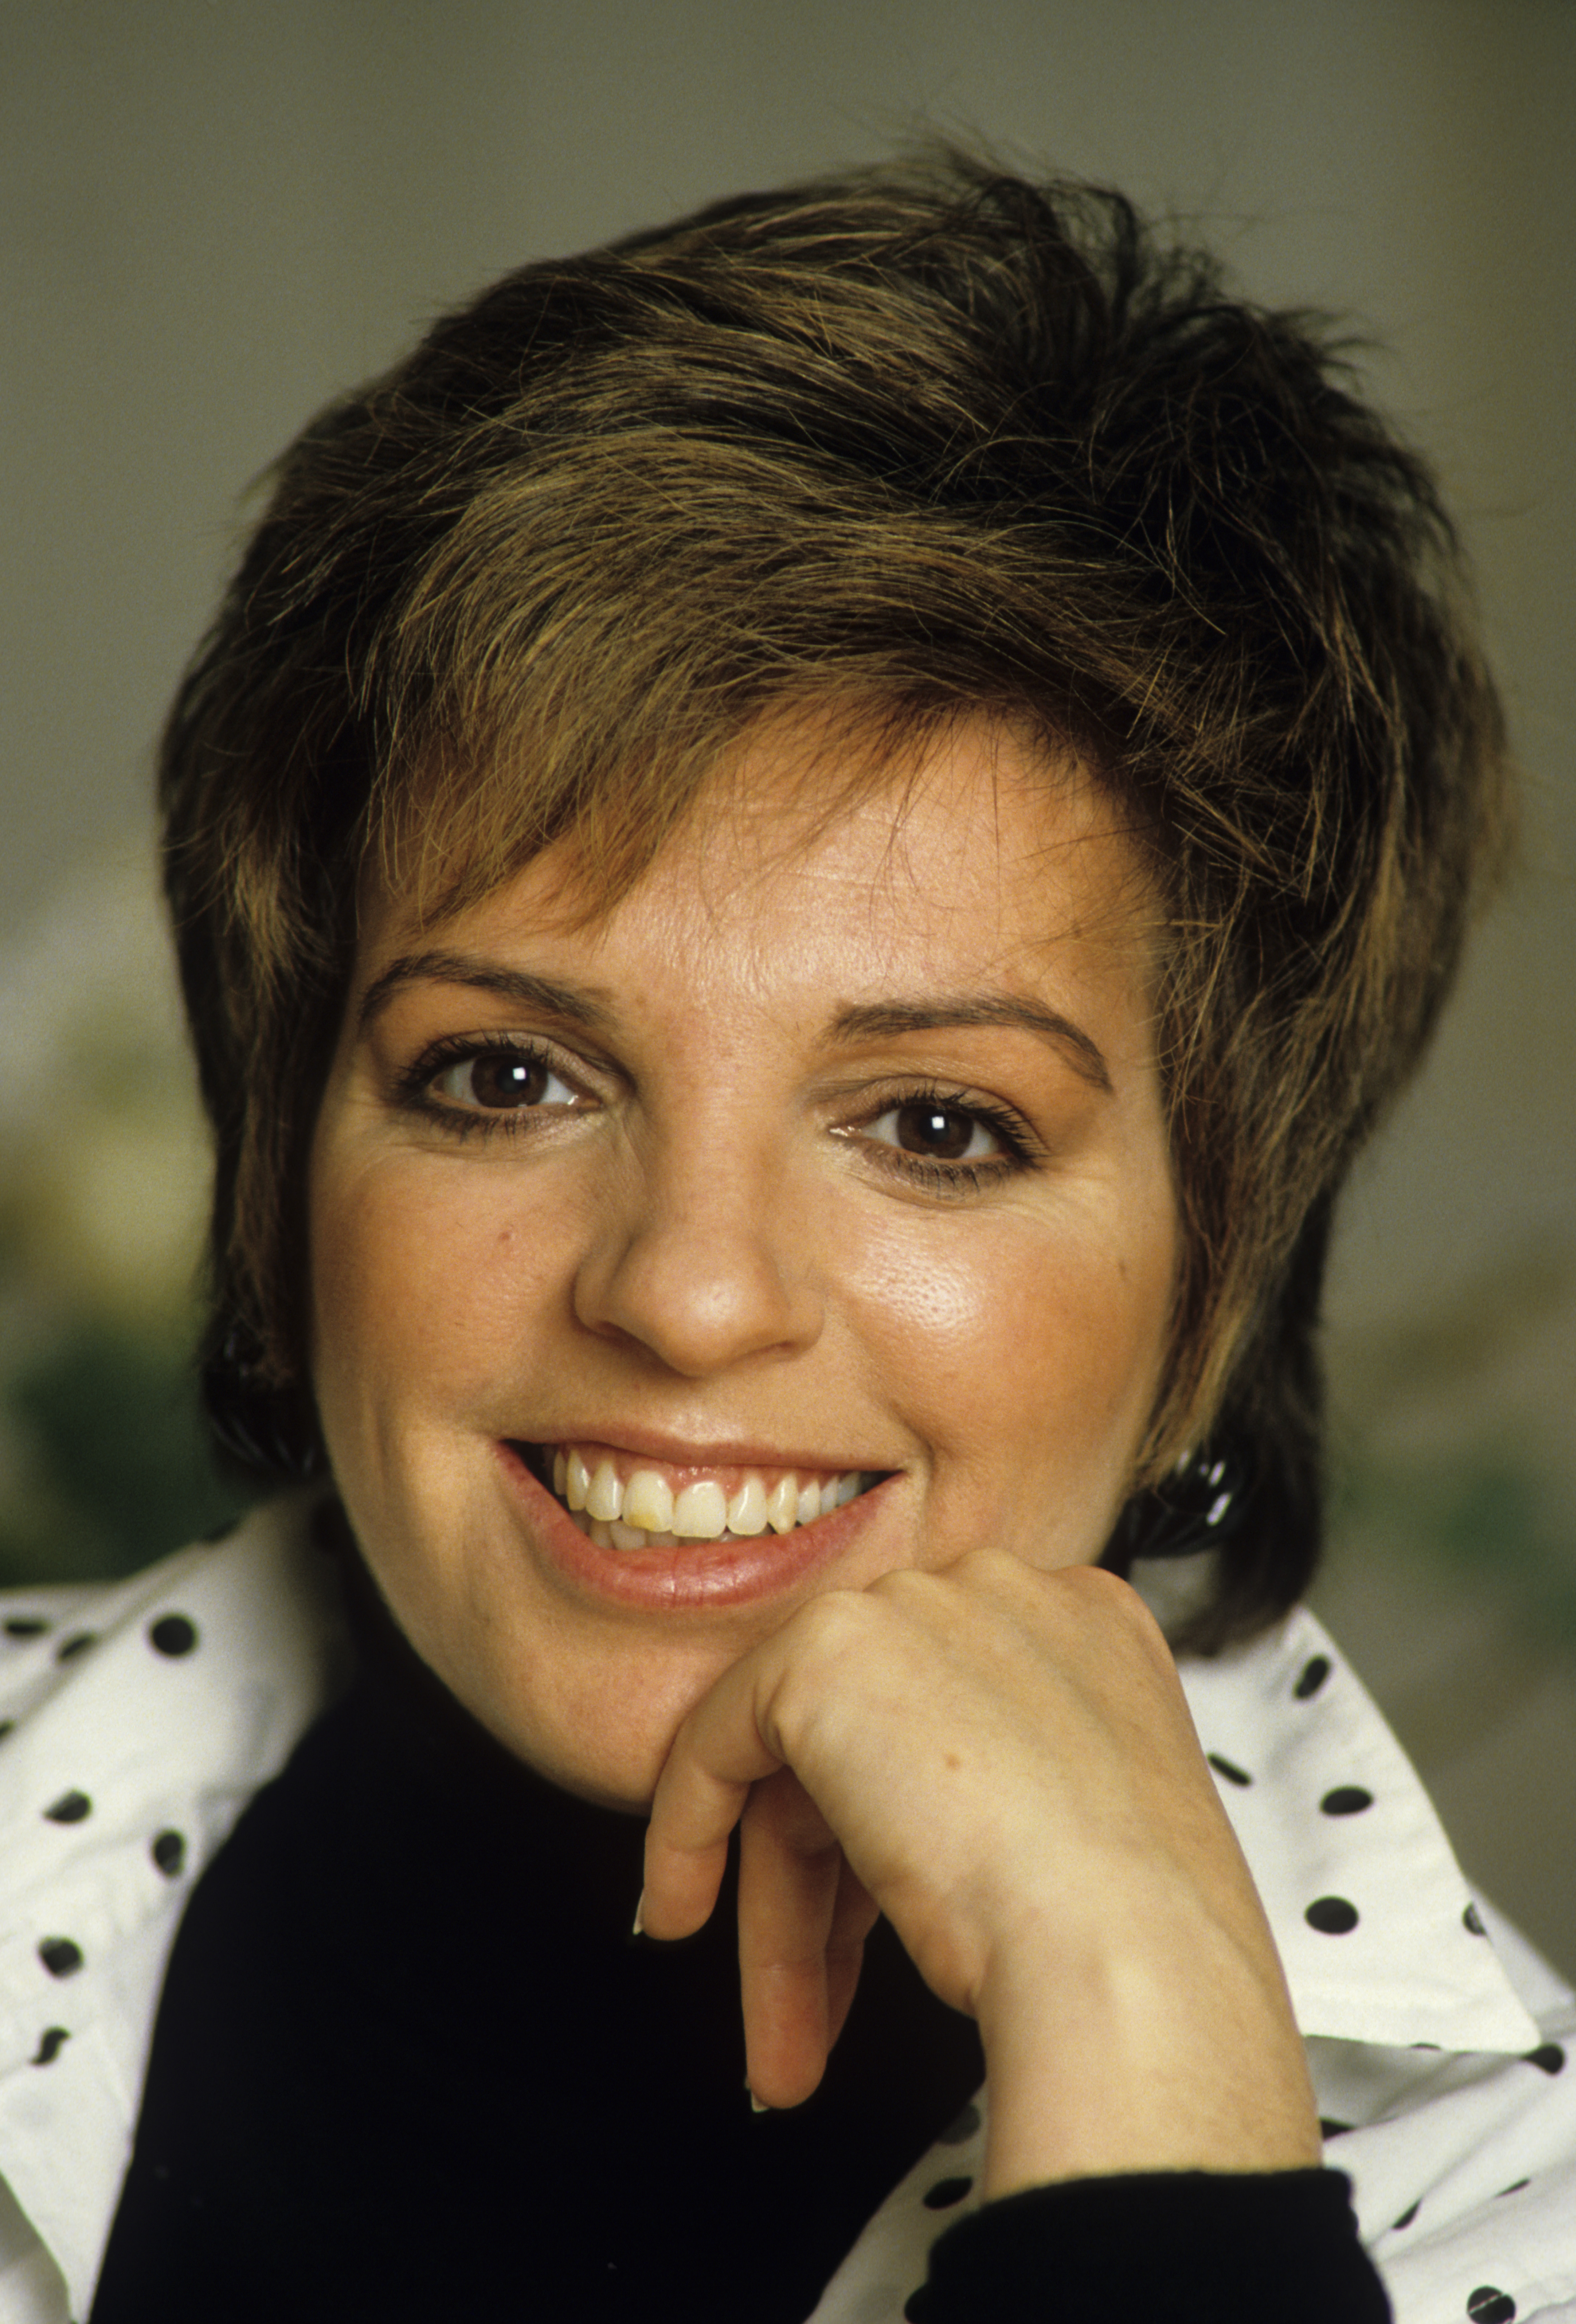 Liza Minnelli poses on March 18, 1986, in London, England. | Source: Getty Images